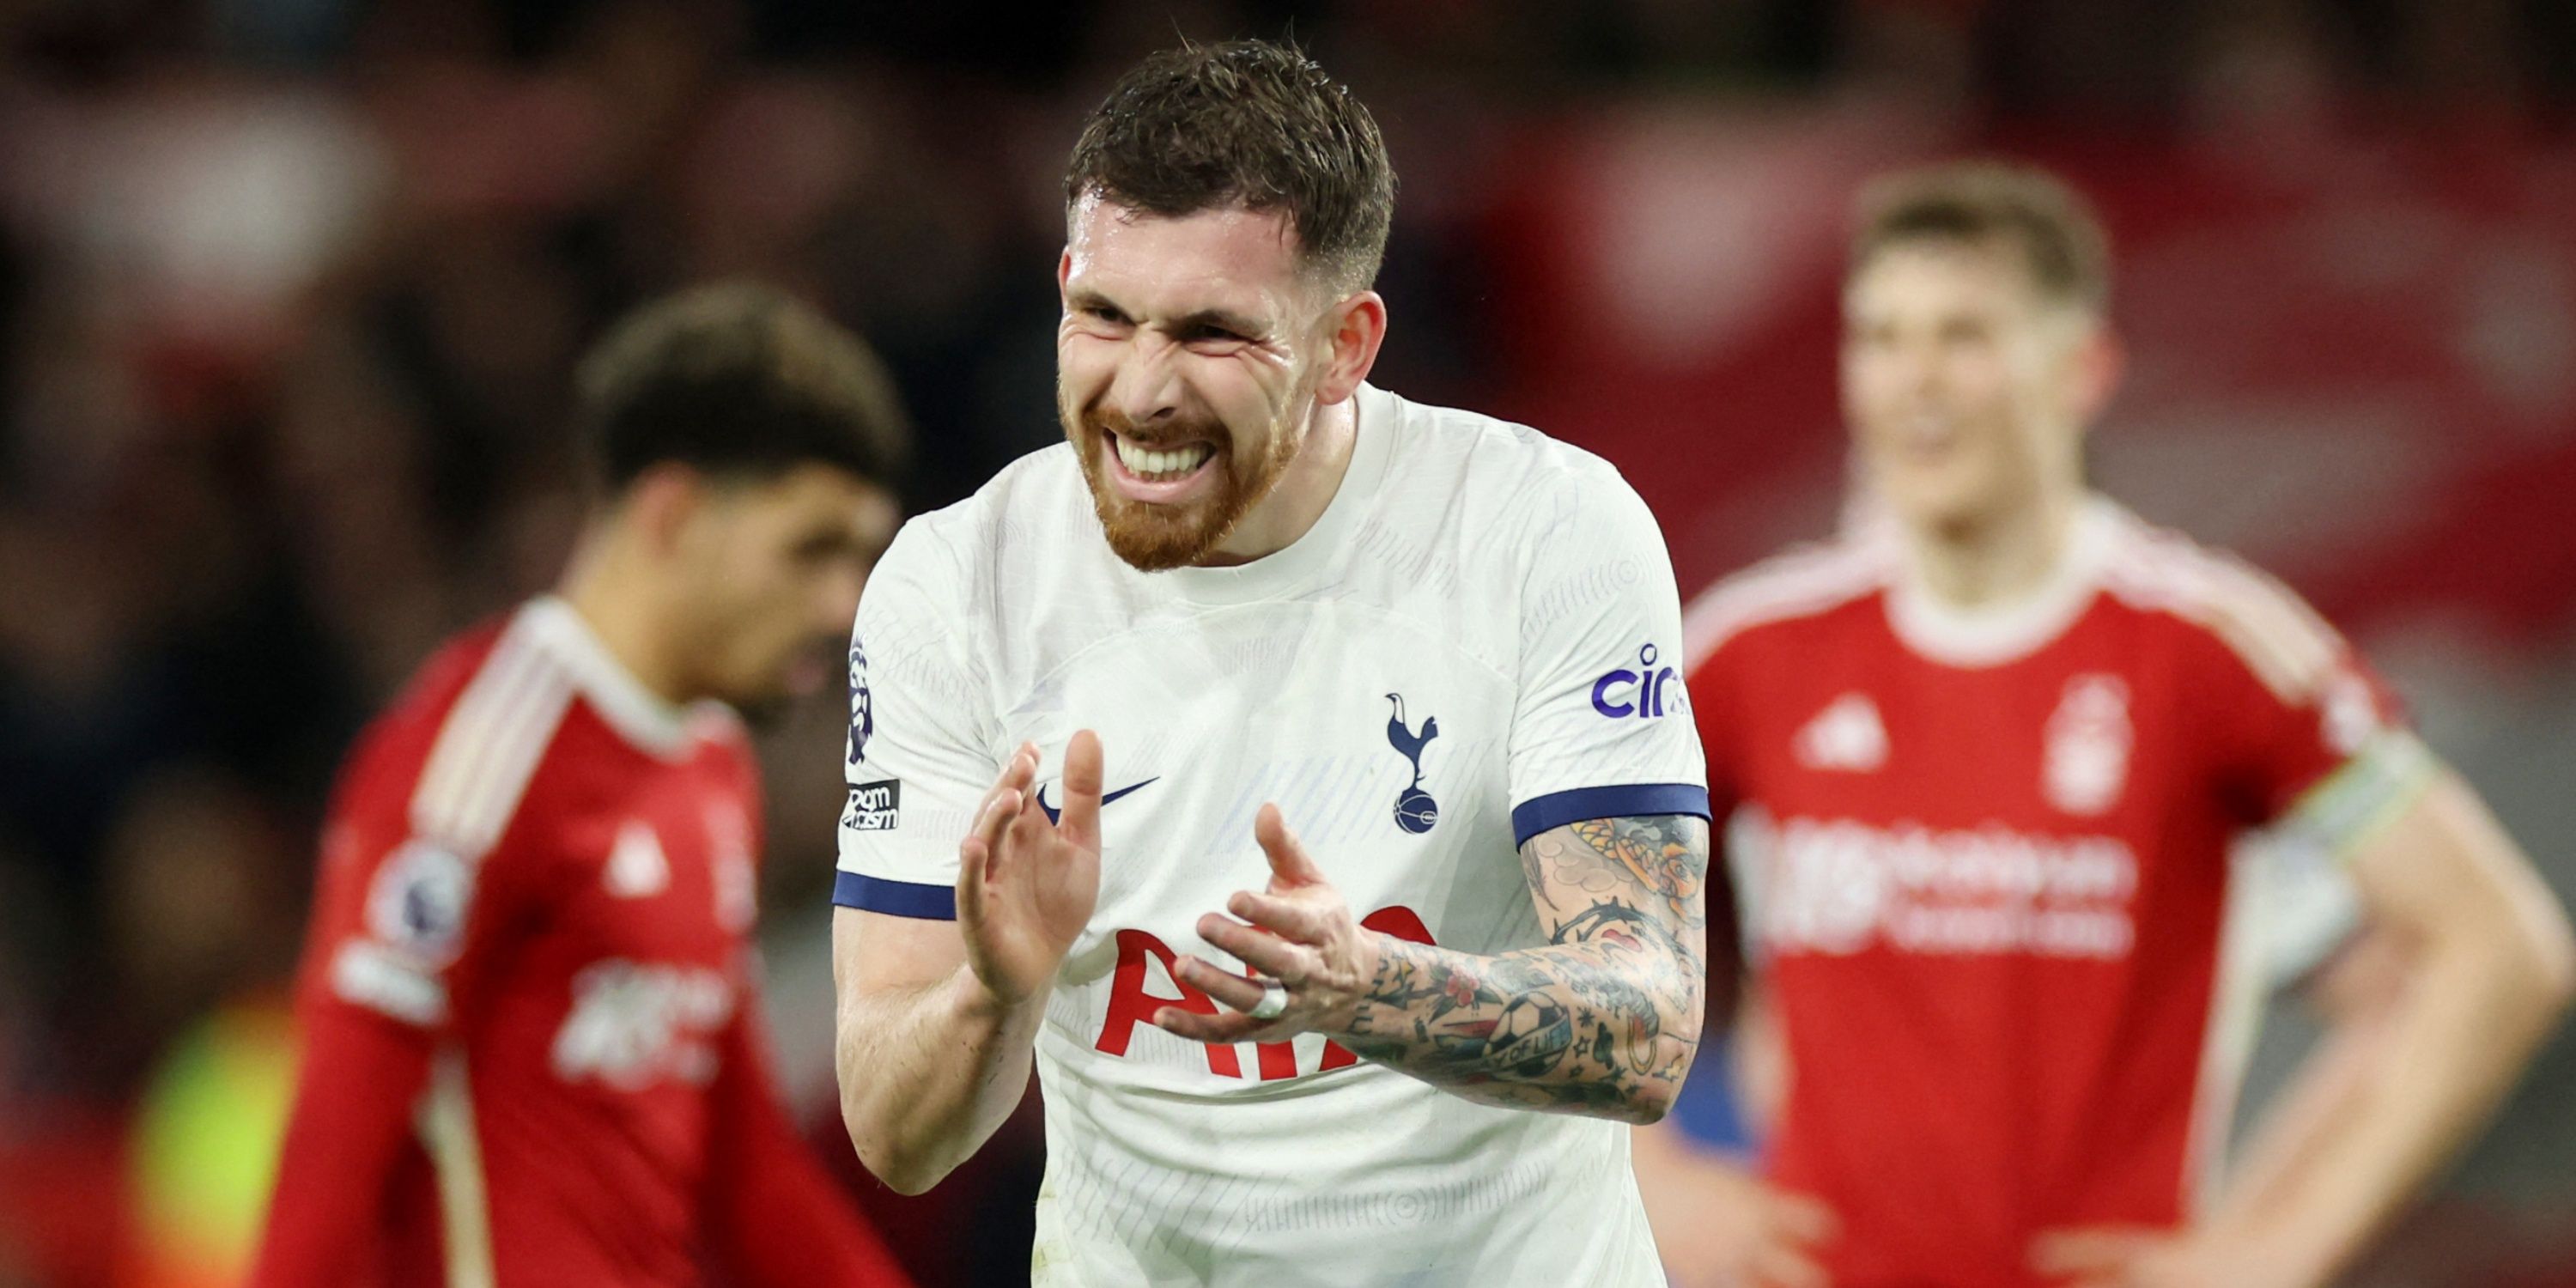 Pierre Hojbjerg Leaving Tottenham: A Turning Point for the Club?